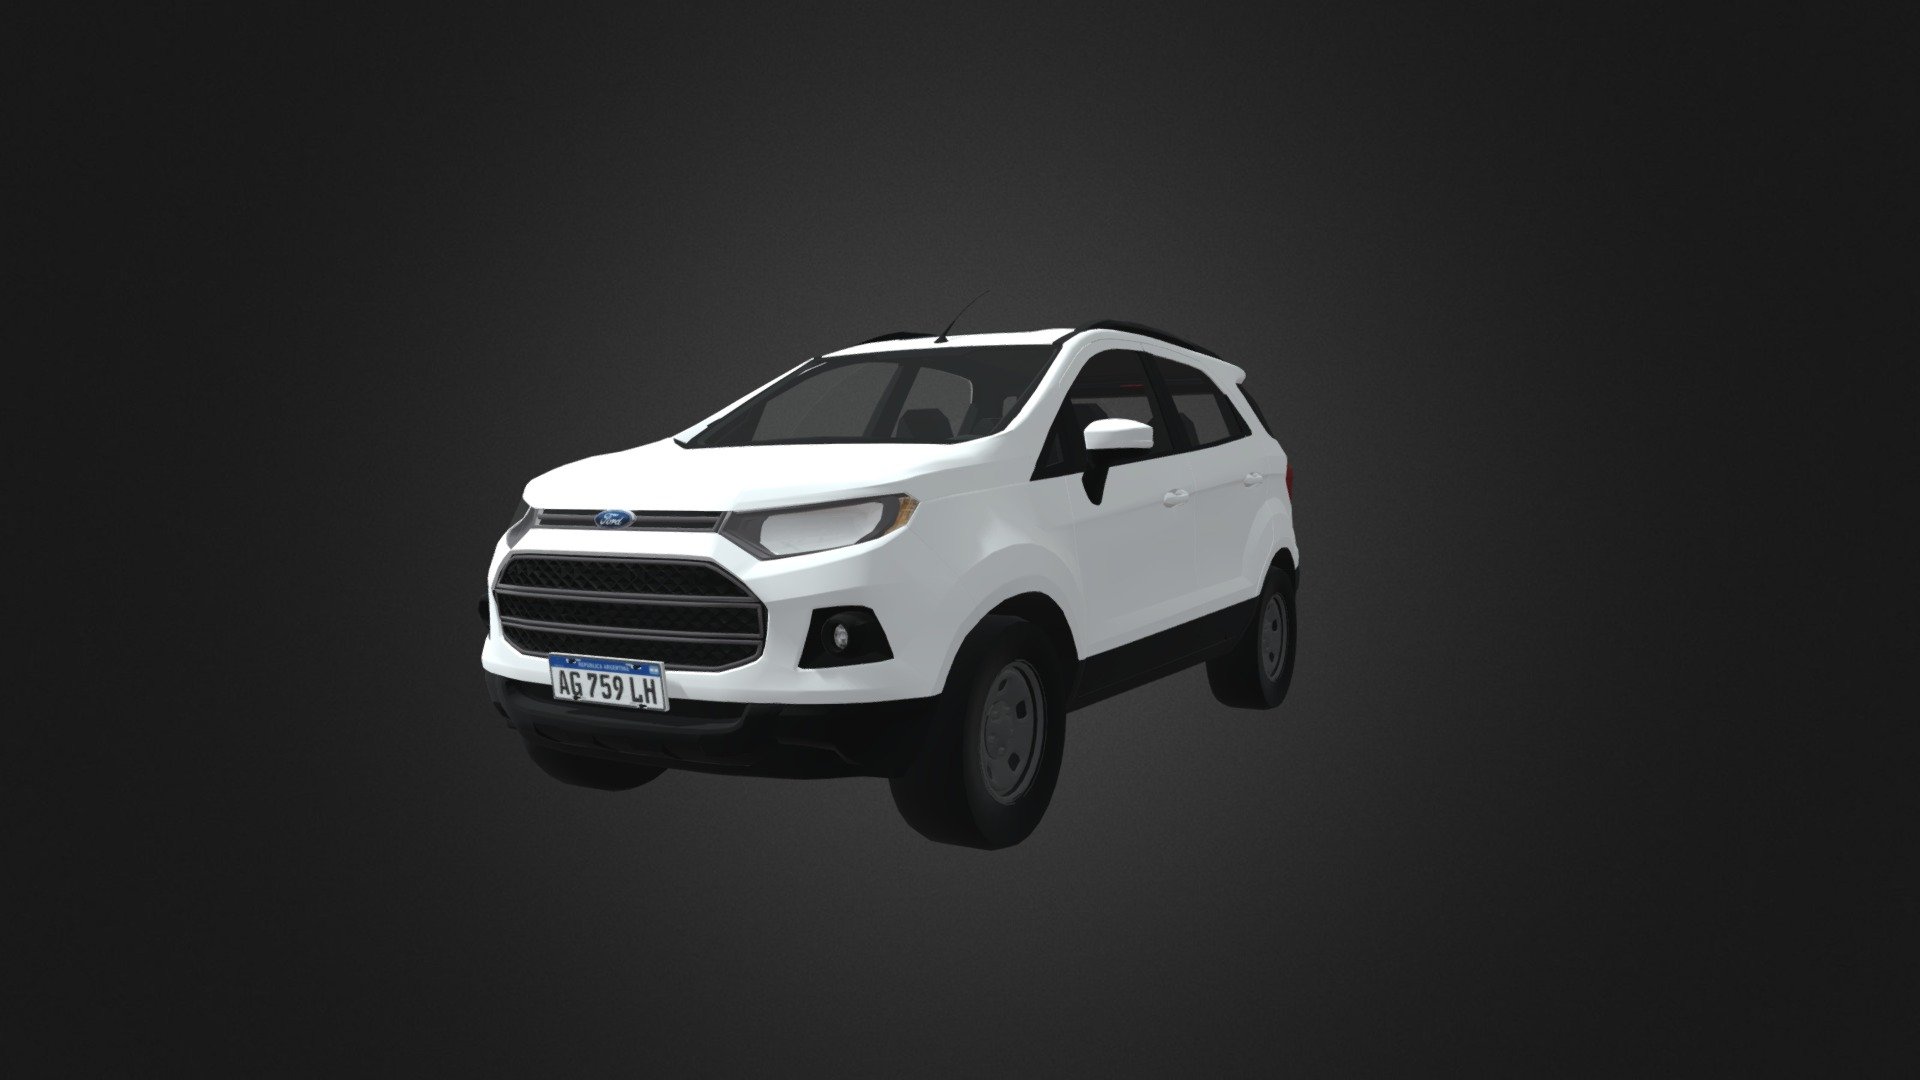 Ford Ecosport imported directly from Roblox Studio.

About Car:The Ford EcoSport (pronounced Eh-koh-sport)[1] is a subcompact crossover SUV (B-segment) manufactured by Ford. The first-generation model was developed and built in Brazil by Ford Brazil since 2003, at the Camaçari plant. The second-generation model was launched in 2012, which was assembled in factories in India, Thailand, Russia and Romania.[2] The vehicle entered the North American market for the first time in 2018. Throughout its existence, the EcoSport shares its platform with the Fiesta 3d model